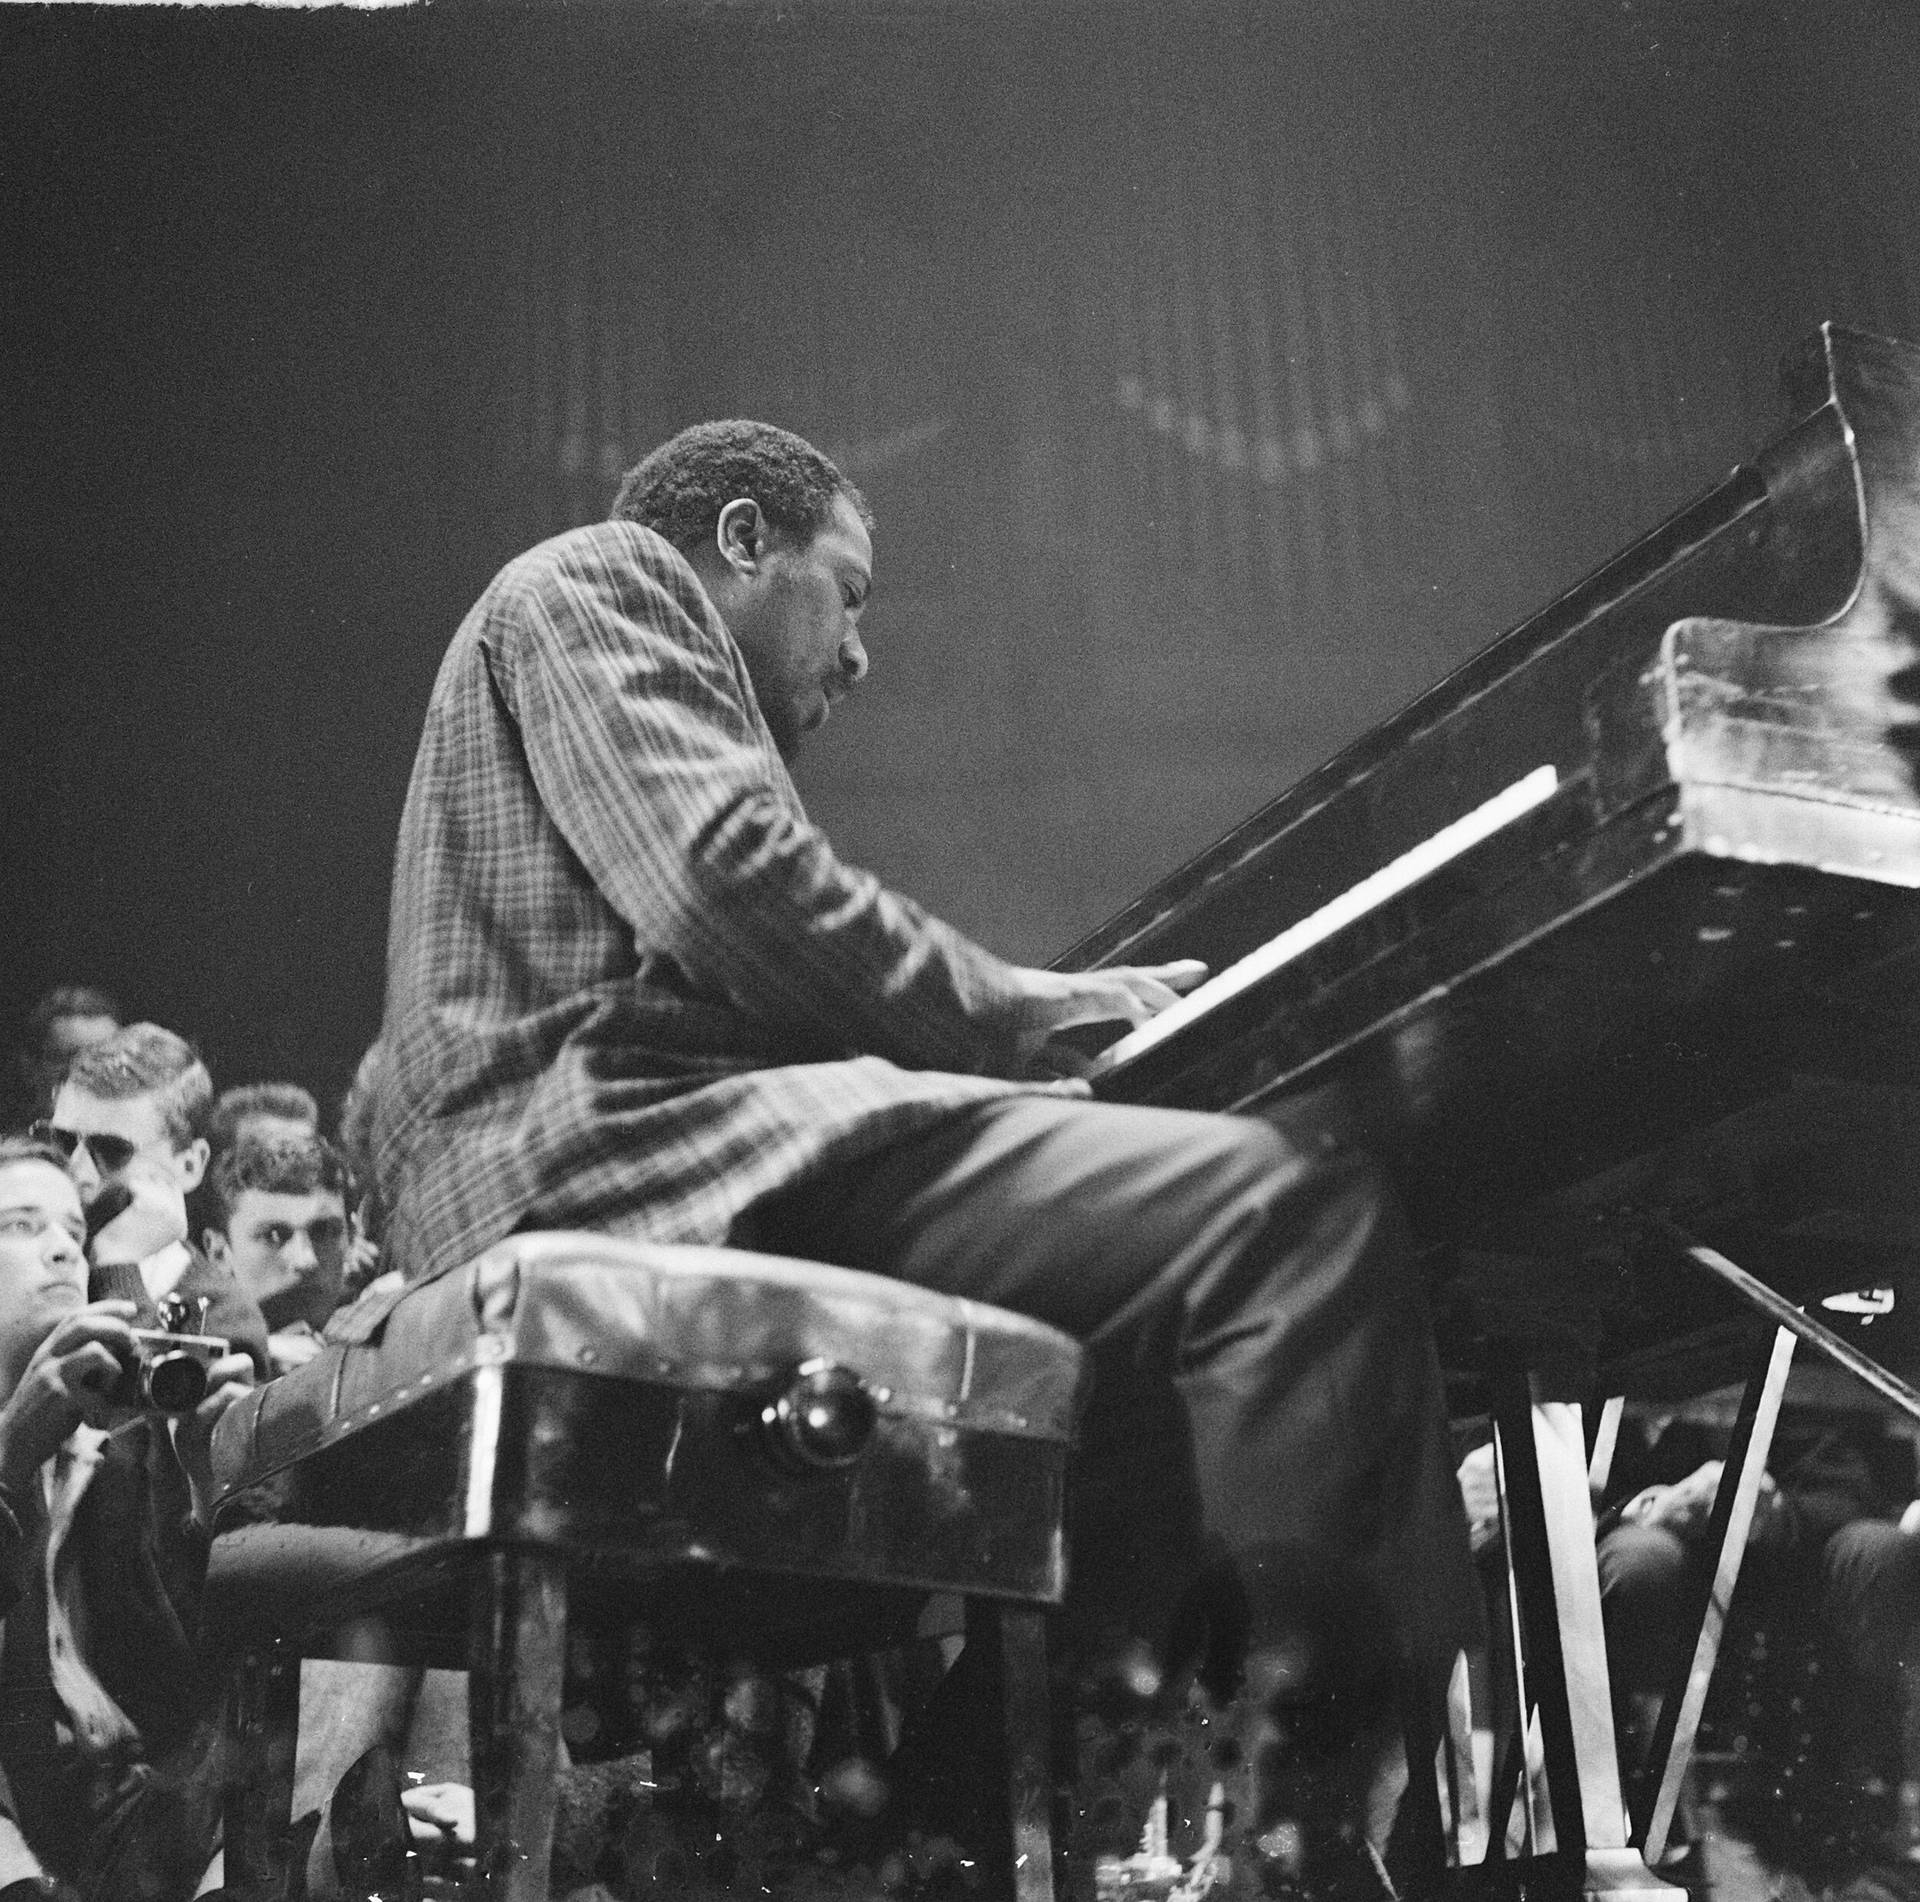 Thelonious Monk Classical Piano Playing Wallpaper